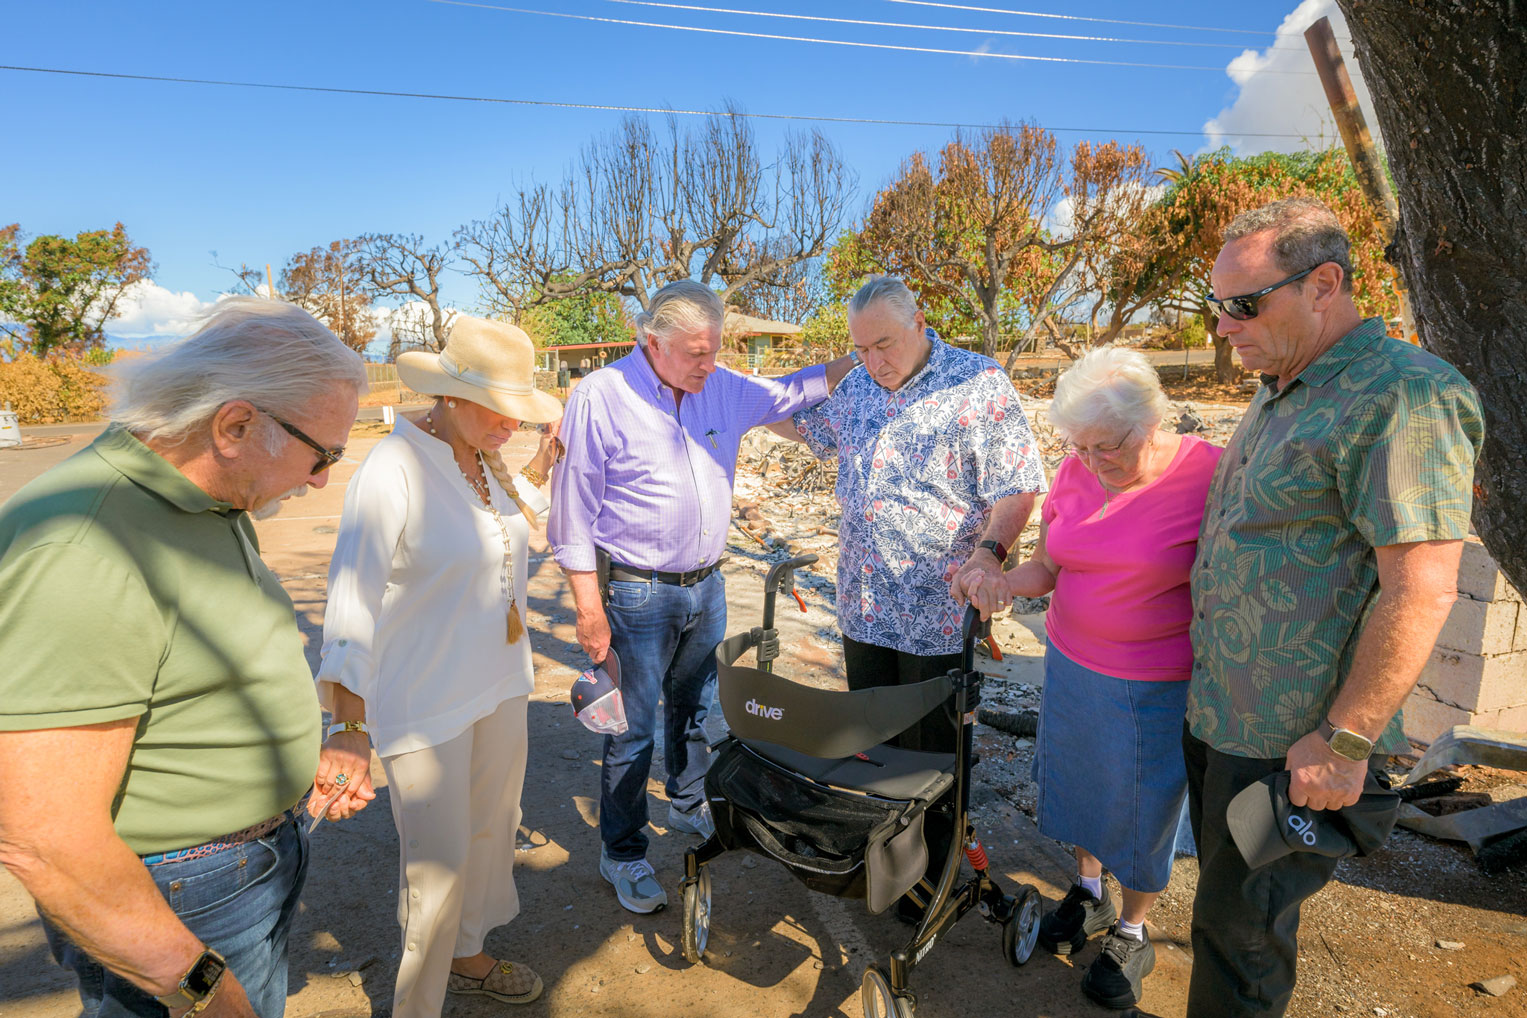 Samaritan's Purse President Franklin Graham prayed with local church leaders and residents during his visit days after the blaze.